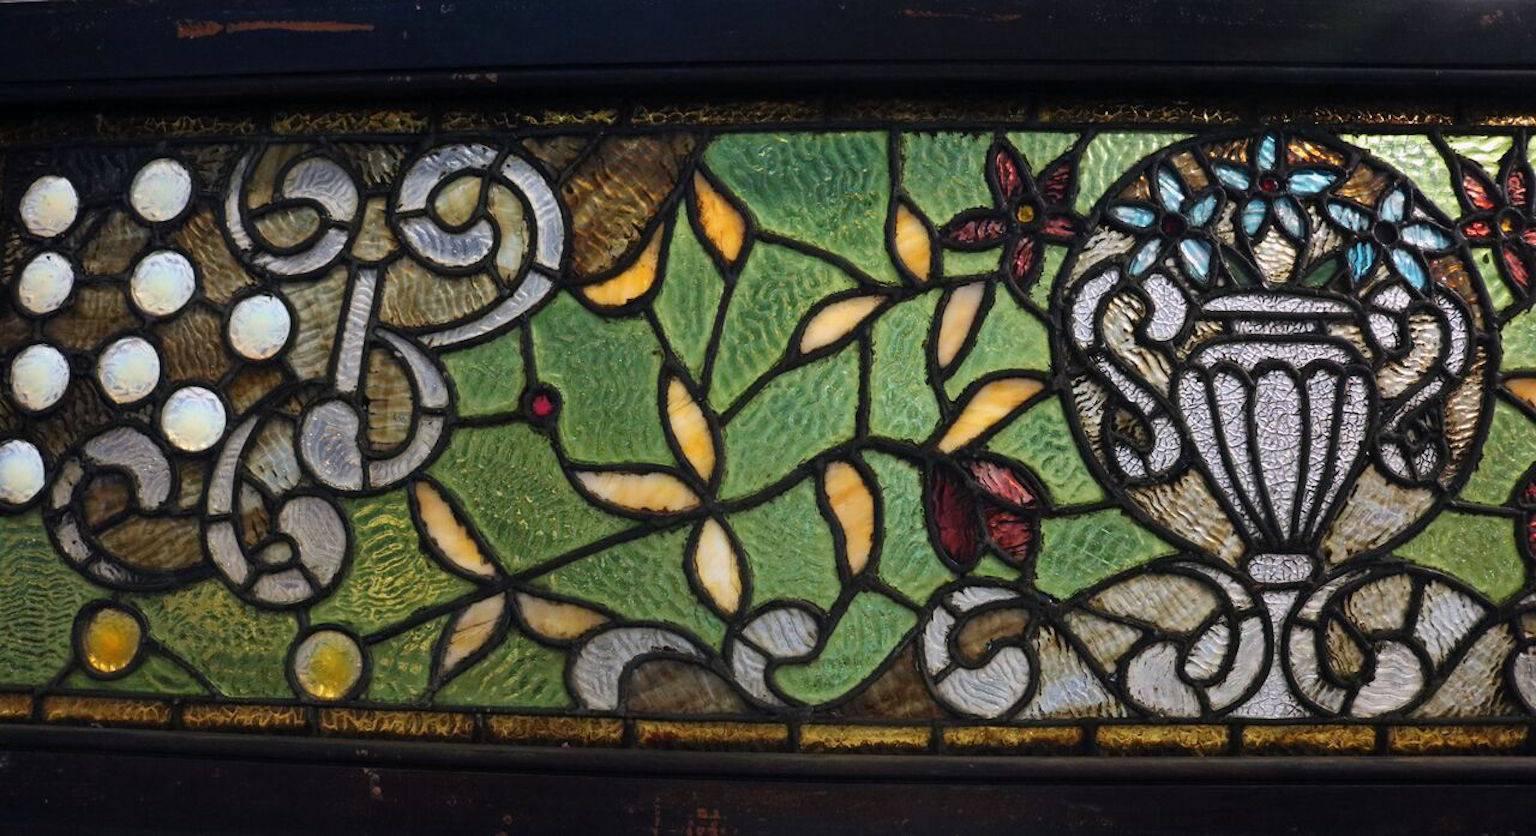 Antique Tiffany LaFarge style window features floral urn design includes chunk jewel and leaded ripple stained glass, late 19th century.